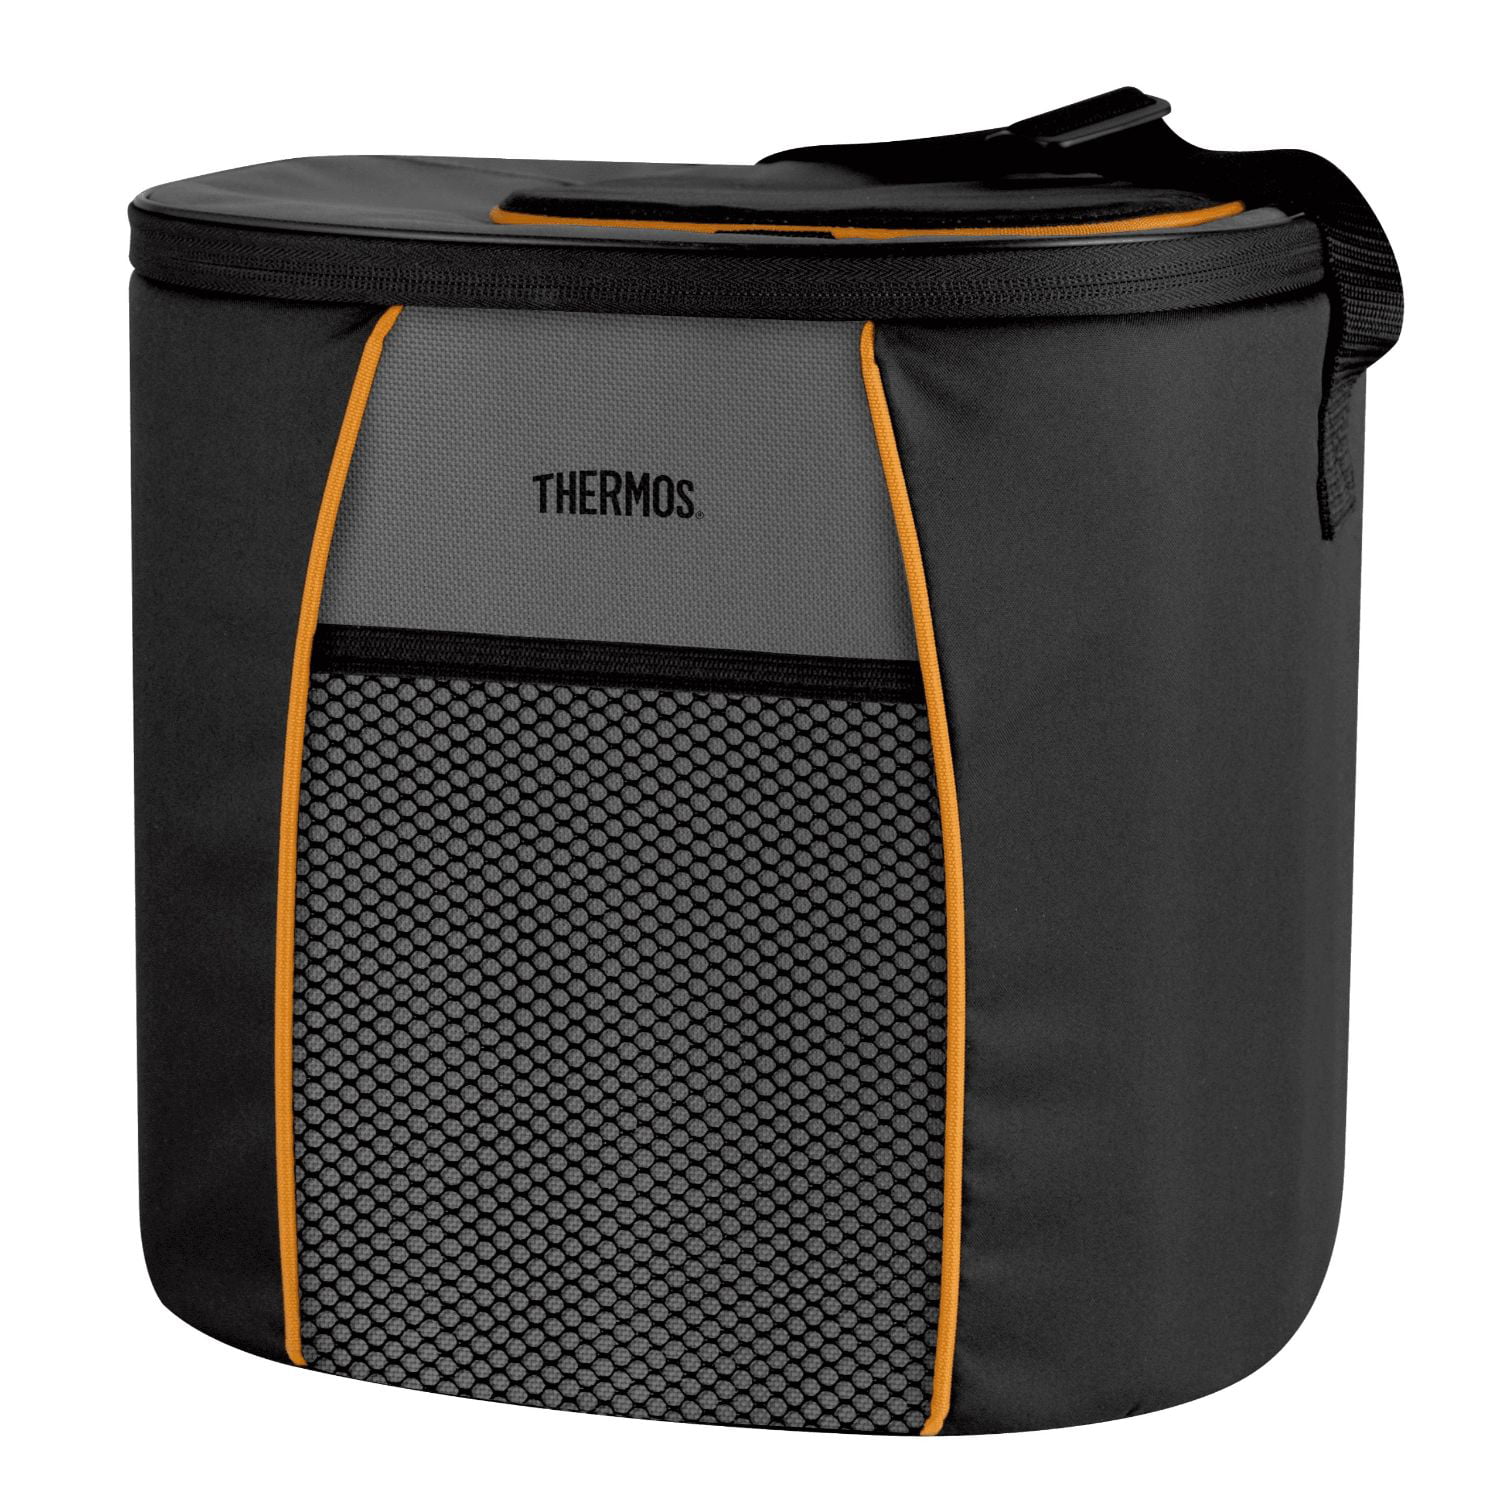 Thermos Classic 12-Can Cooler Bag 